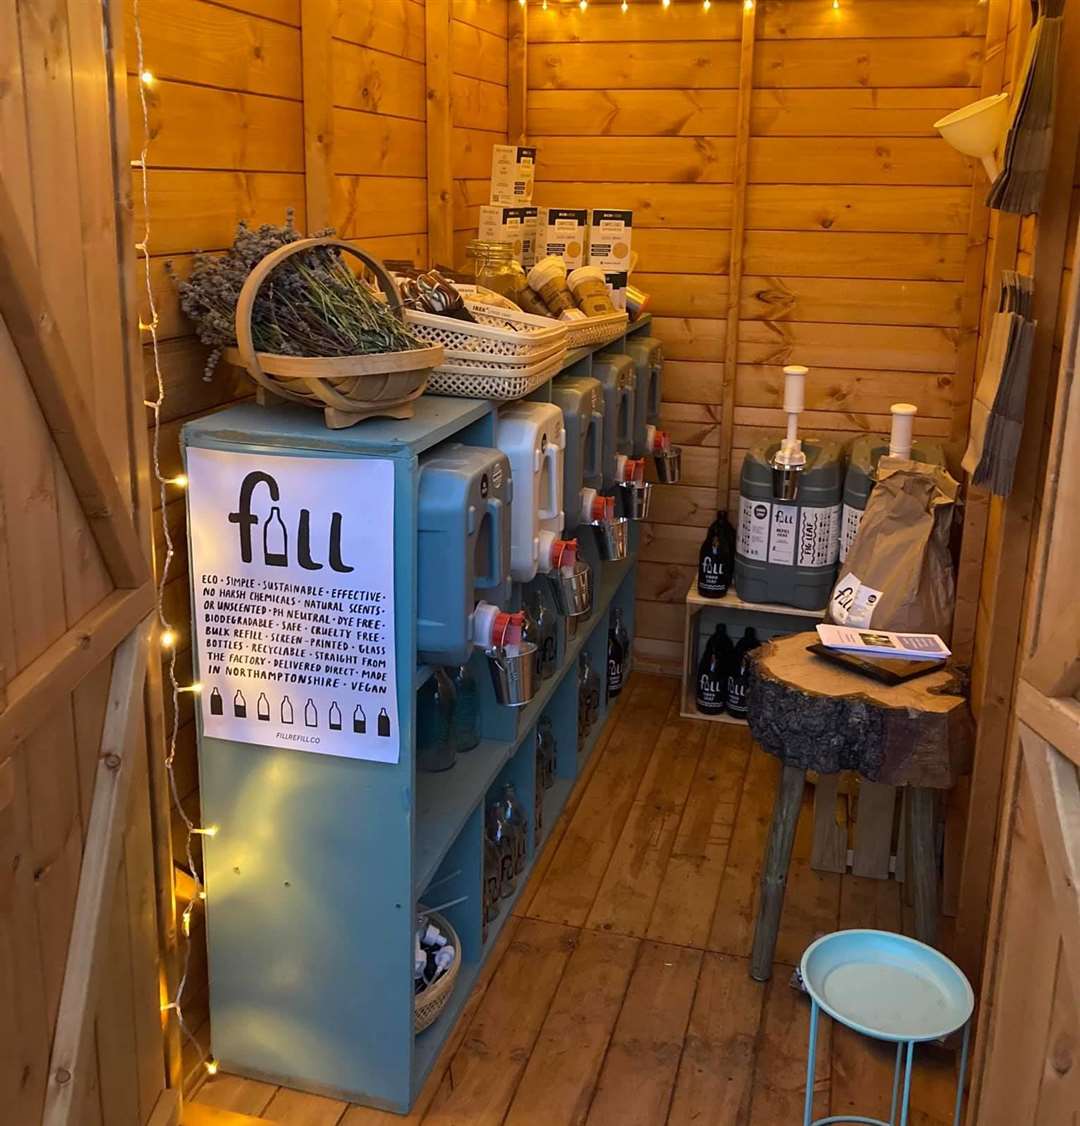 The new fill up station for toiletries, soaps and other liquids at The Refill Hub in Rainham